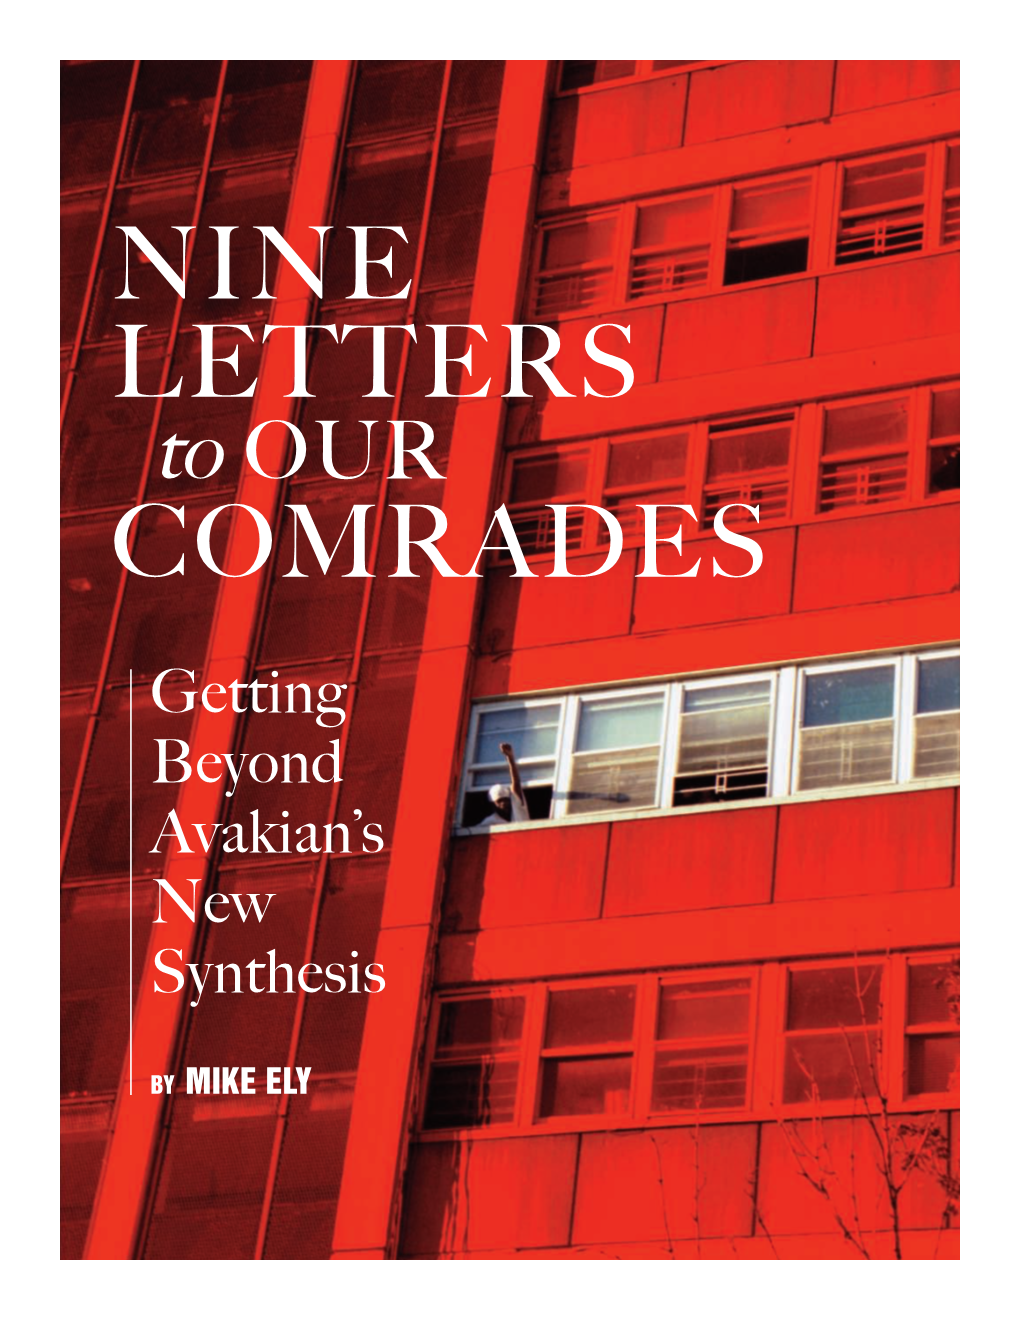 Nine Letters to Our Comrades. Getting Beyond